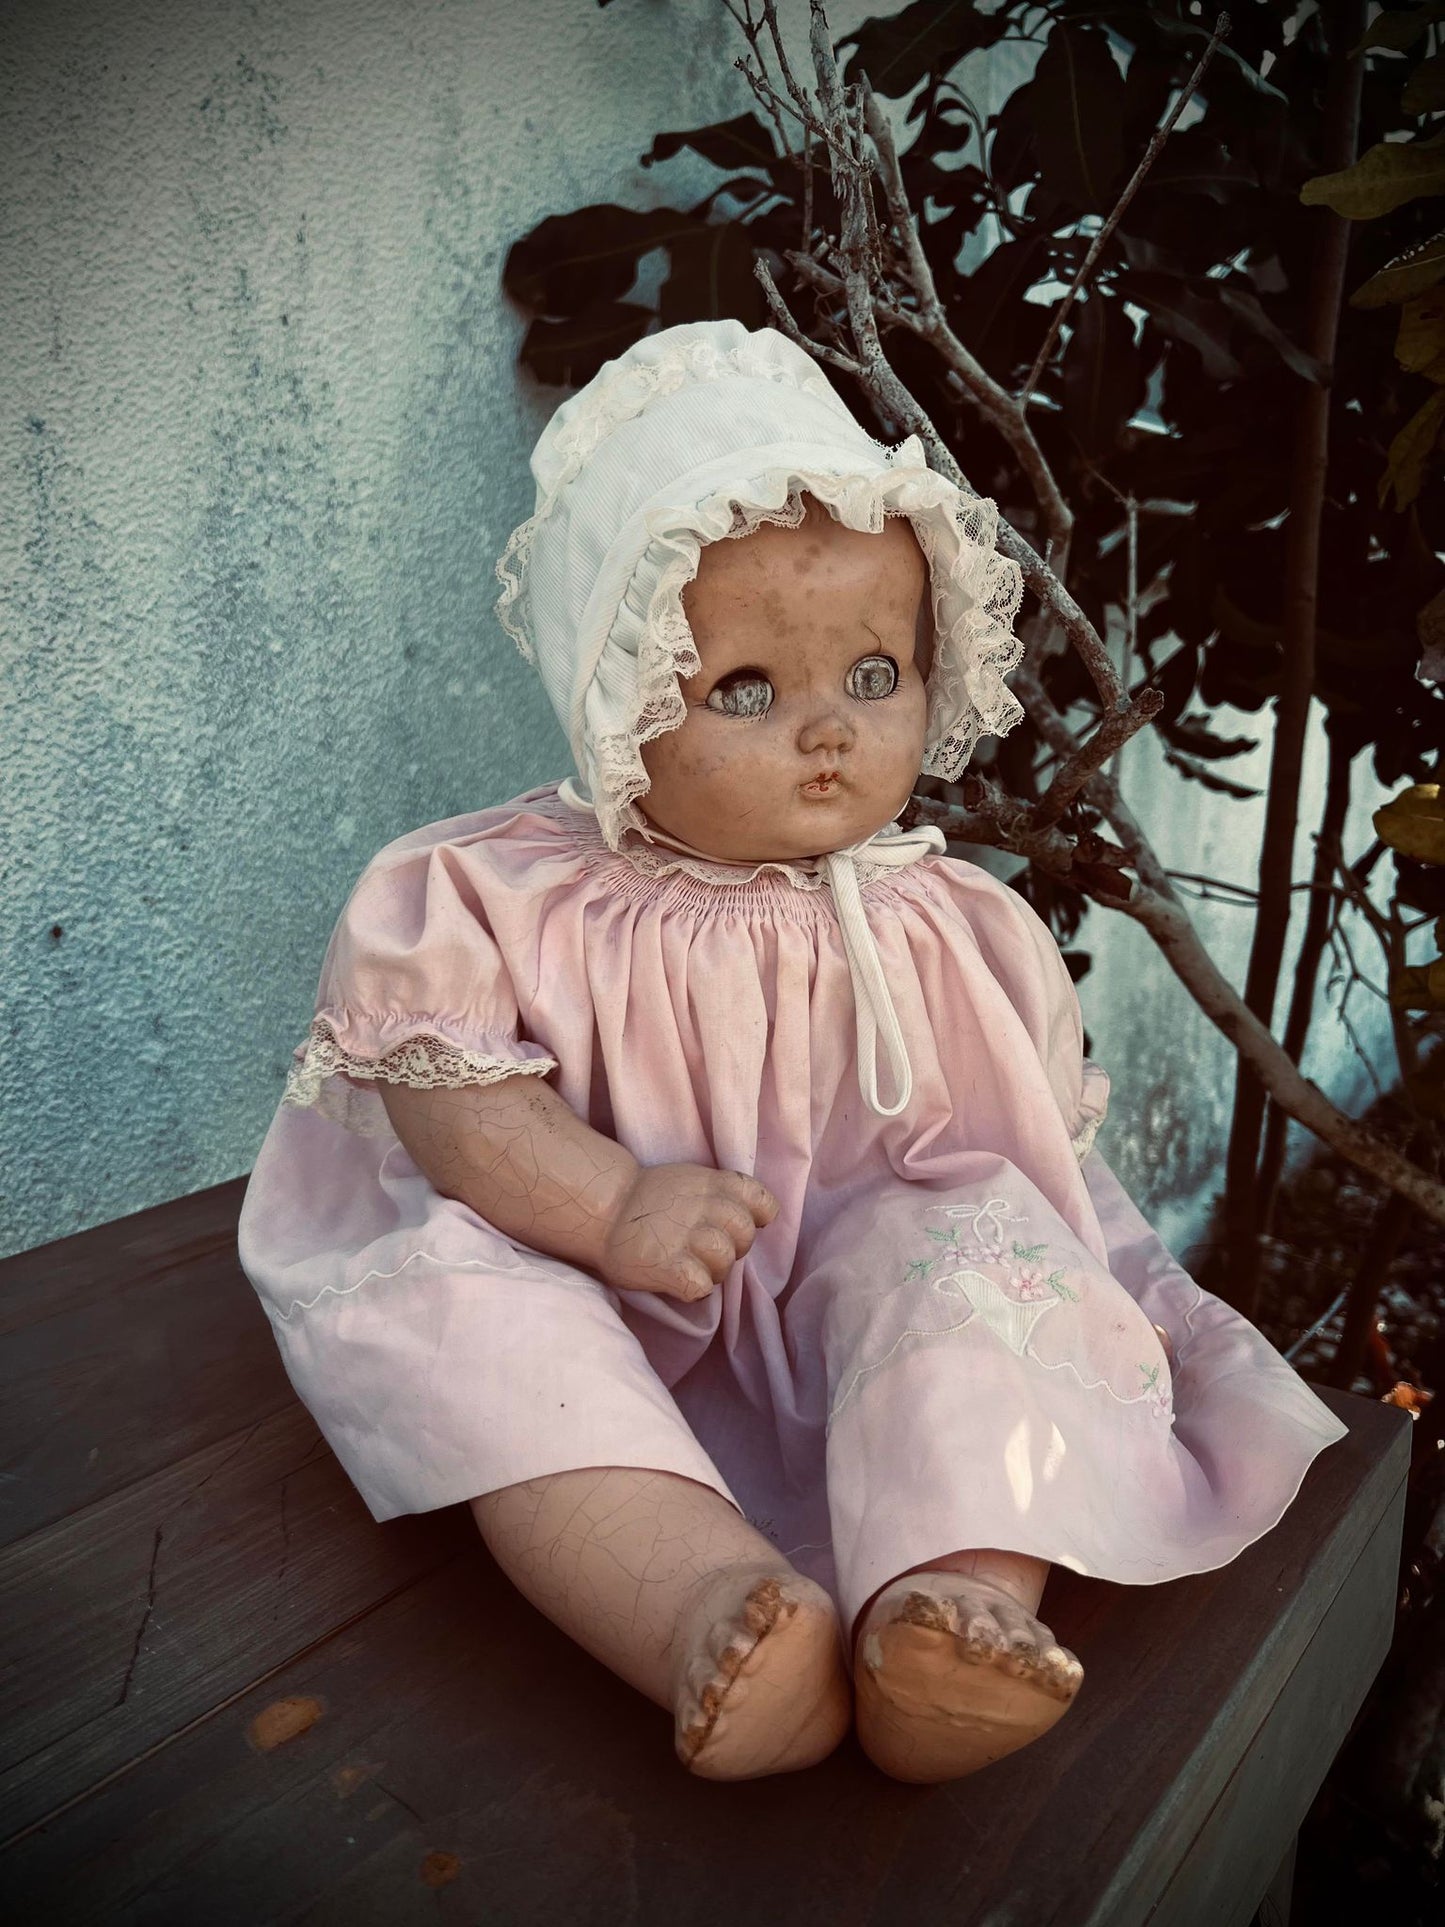 Meet Lana 22" Antique Composition Doll Witchy Creepy Haunted Spirit Infected Scary Spooky Possessed Positive Energy Oddity Gift Idea Vessel